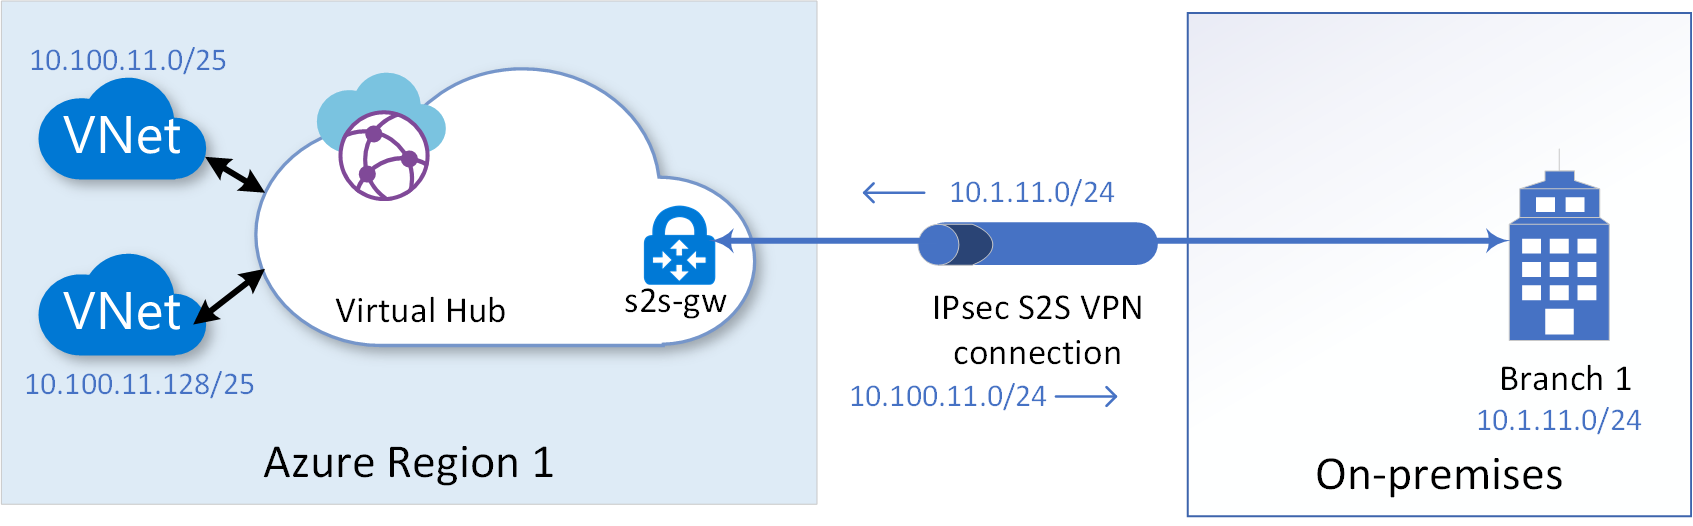 Diagram of connecting an on-premises branch to virtual wan via site-to-site V P N.